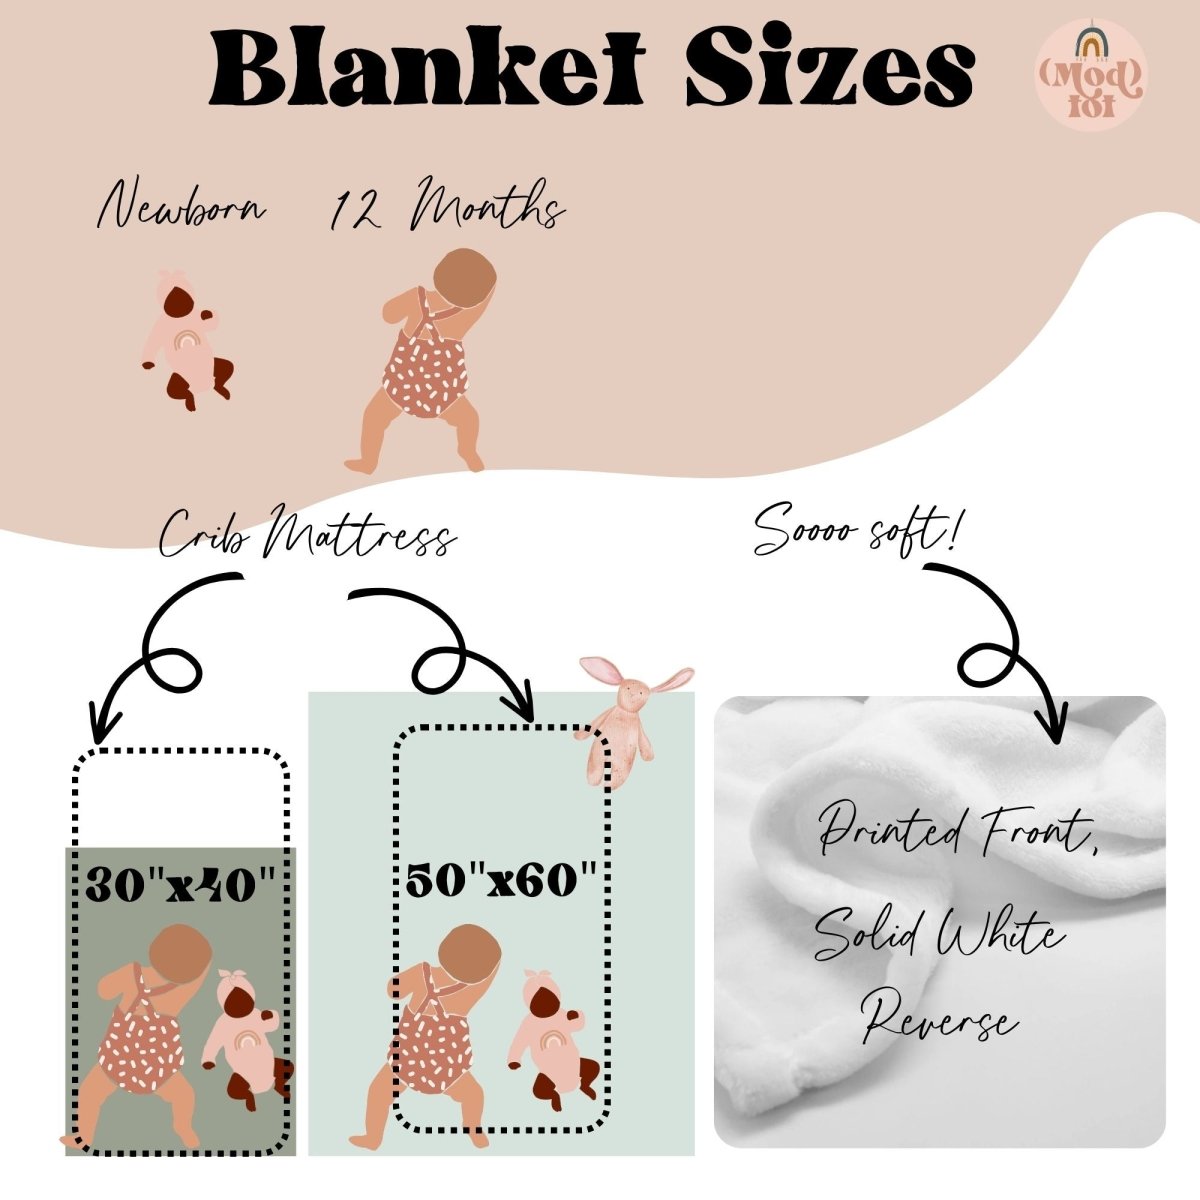 Floral Cowgirl Personalized Minky Blanket - Floral Cowgirl, gender_girl, Personalized_Yes